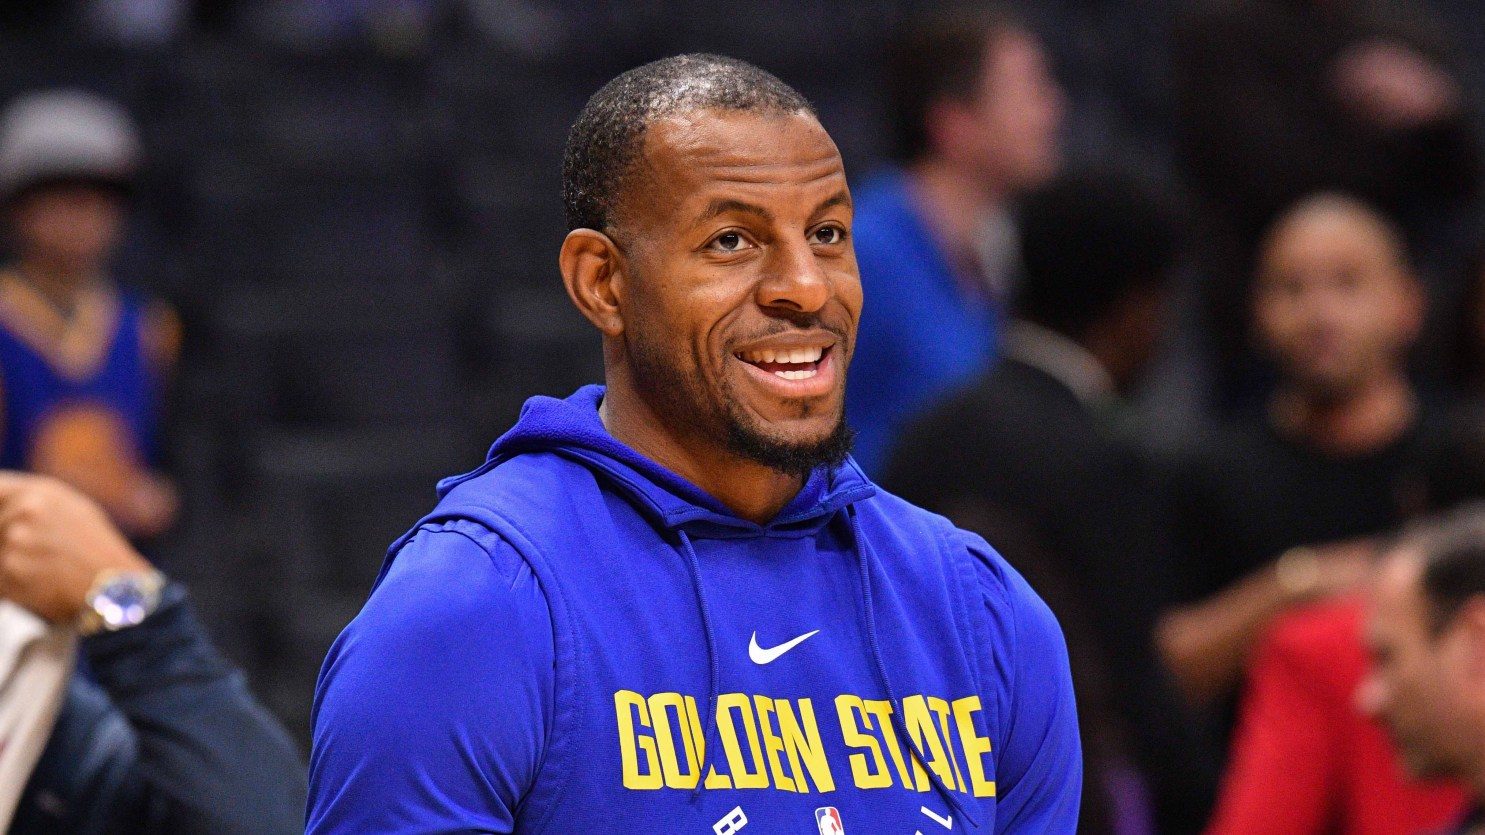 Andre Iguodala deal with Clippers Confirmed